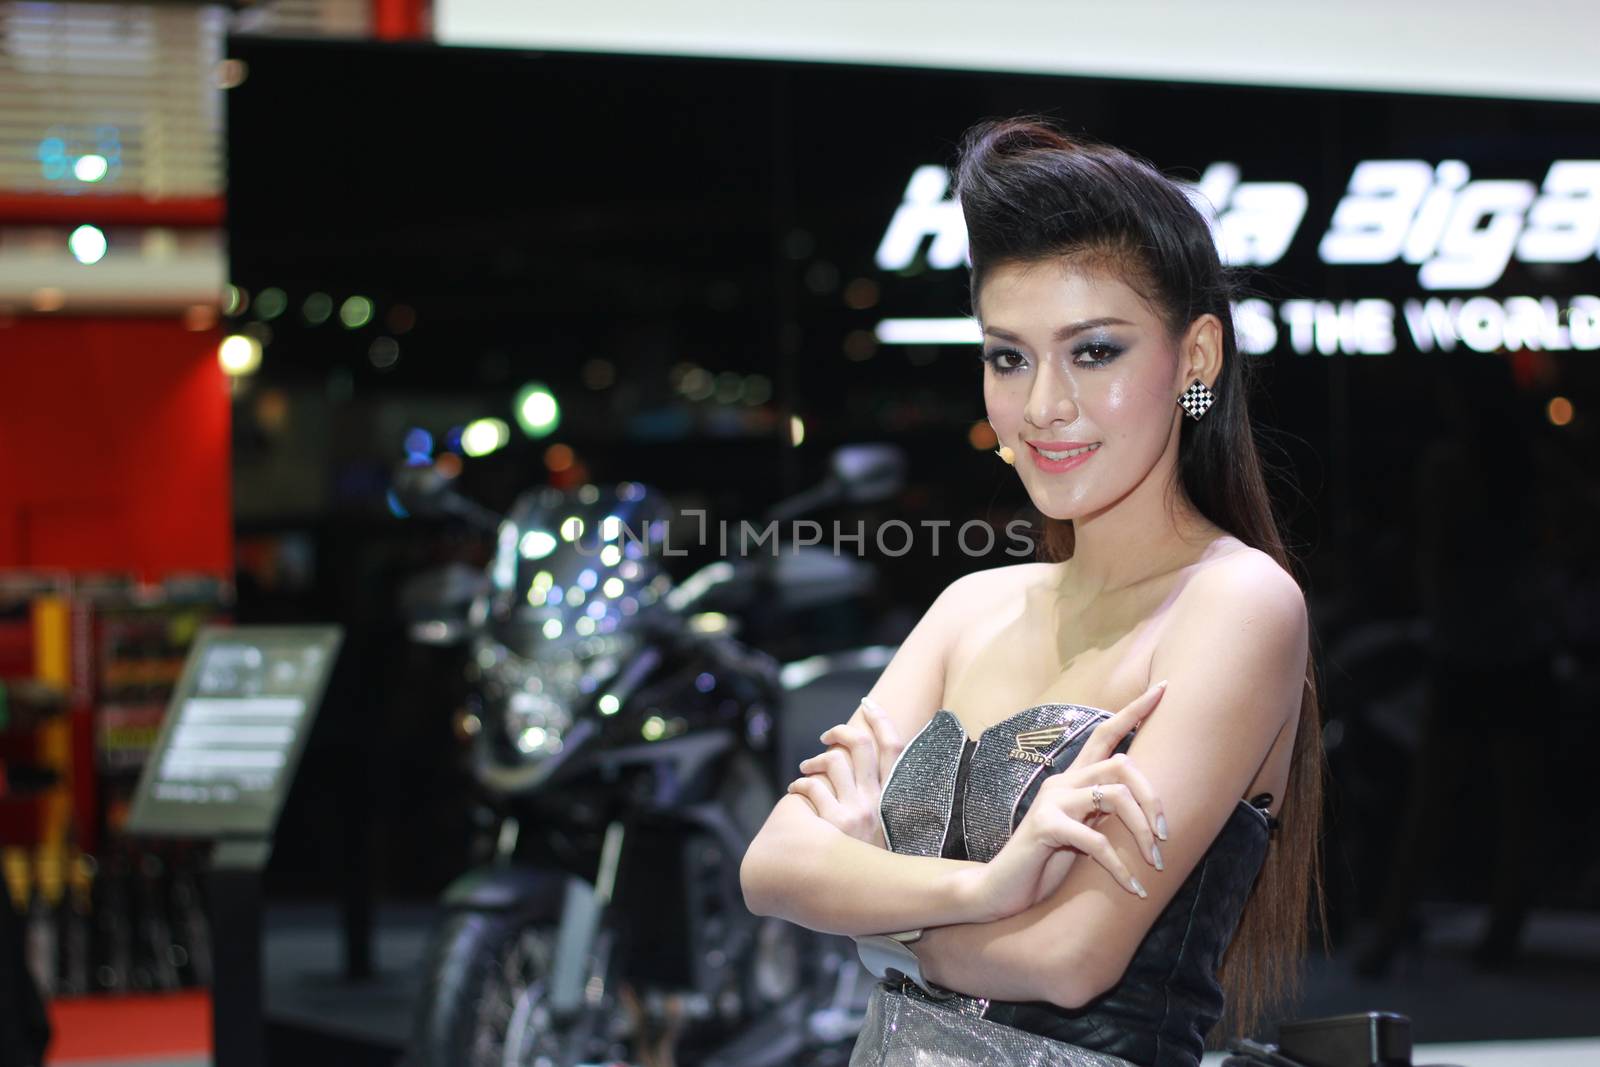 BANGKOK, THAILAND - MARCH 30, 2014: Unidentified female presenter pose in the 35th Bangkok International Motor Show on March 30, 2014 in Nonthaburi, Thailand.